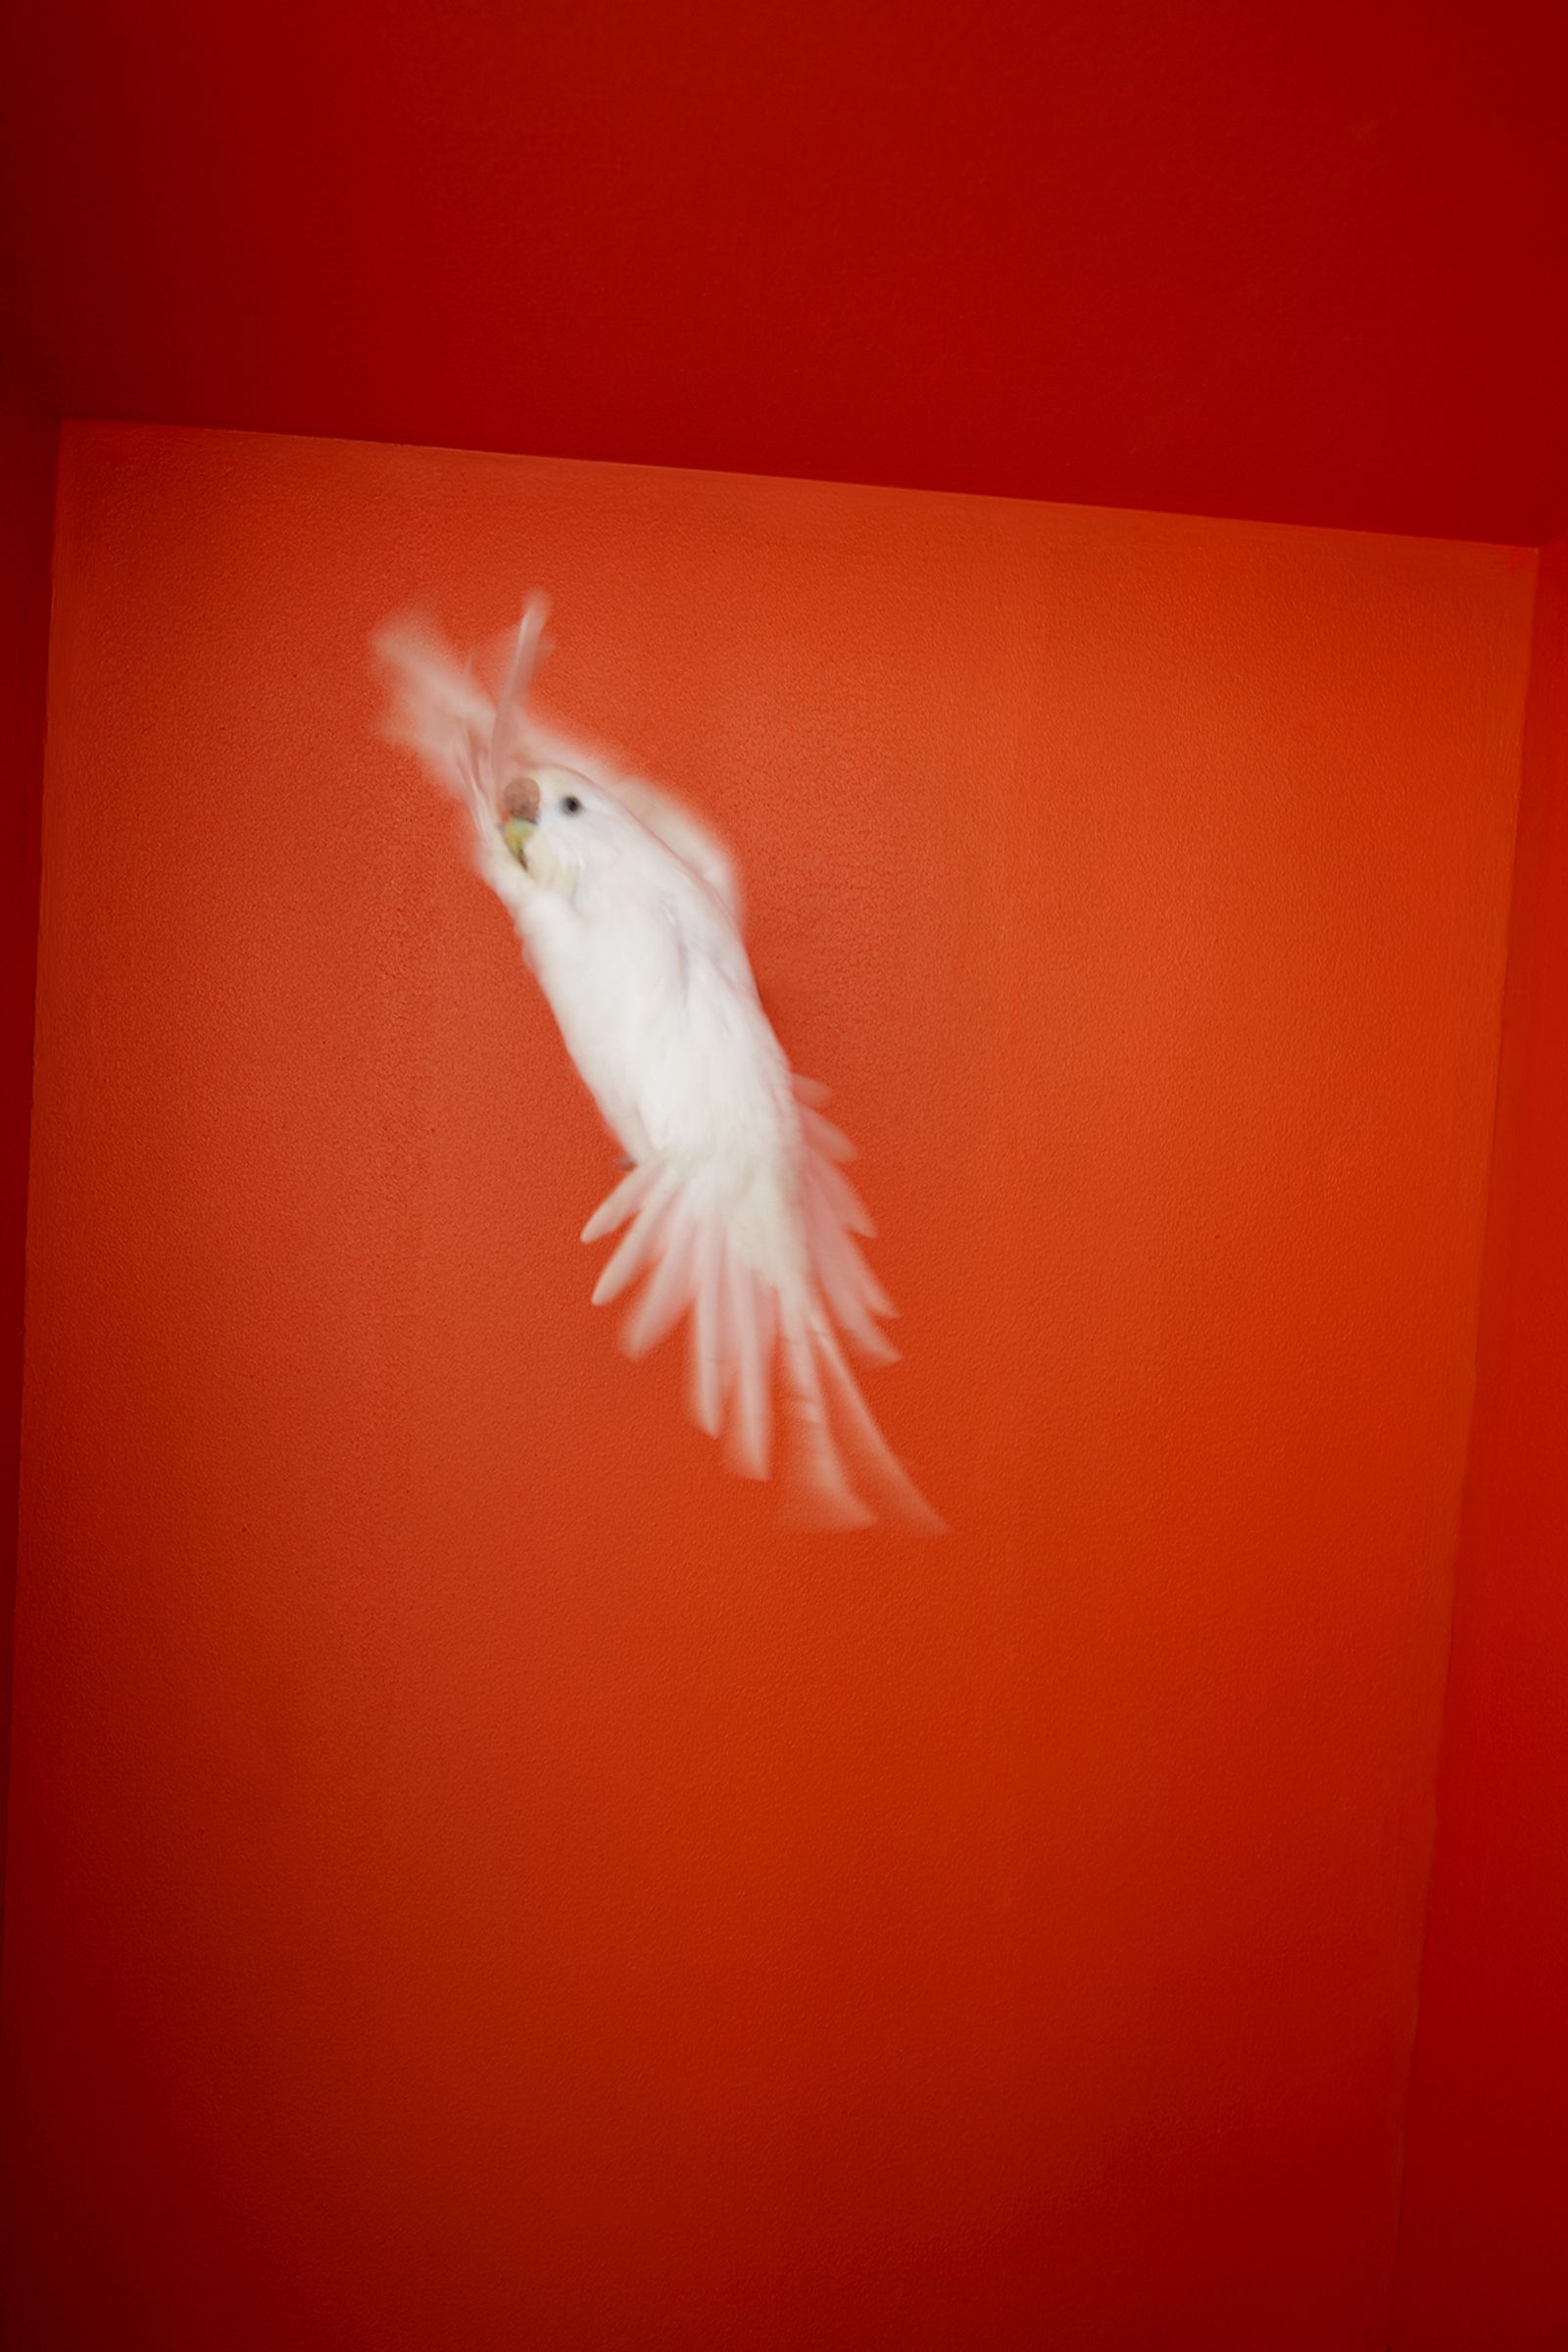 © Kristin Schnell - Image from the Budgie Mutations photography project